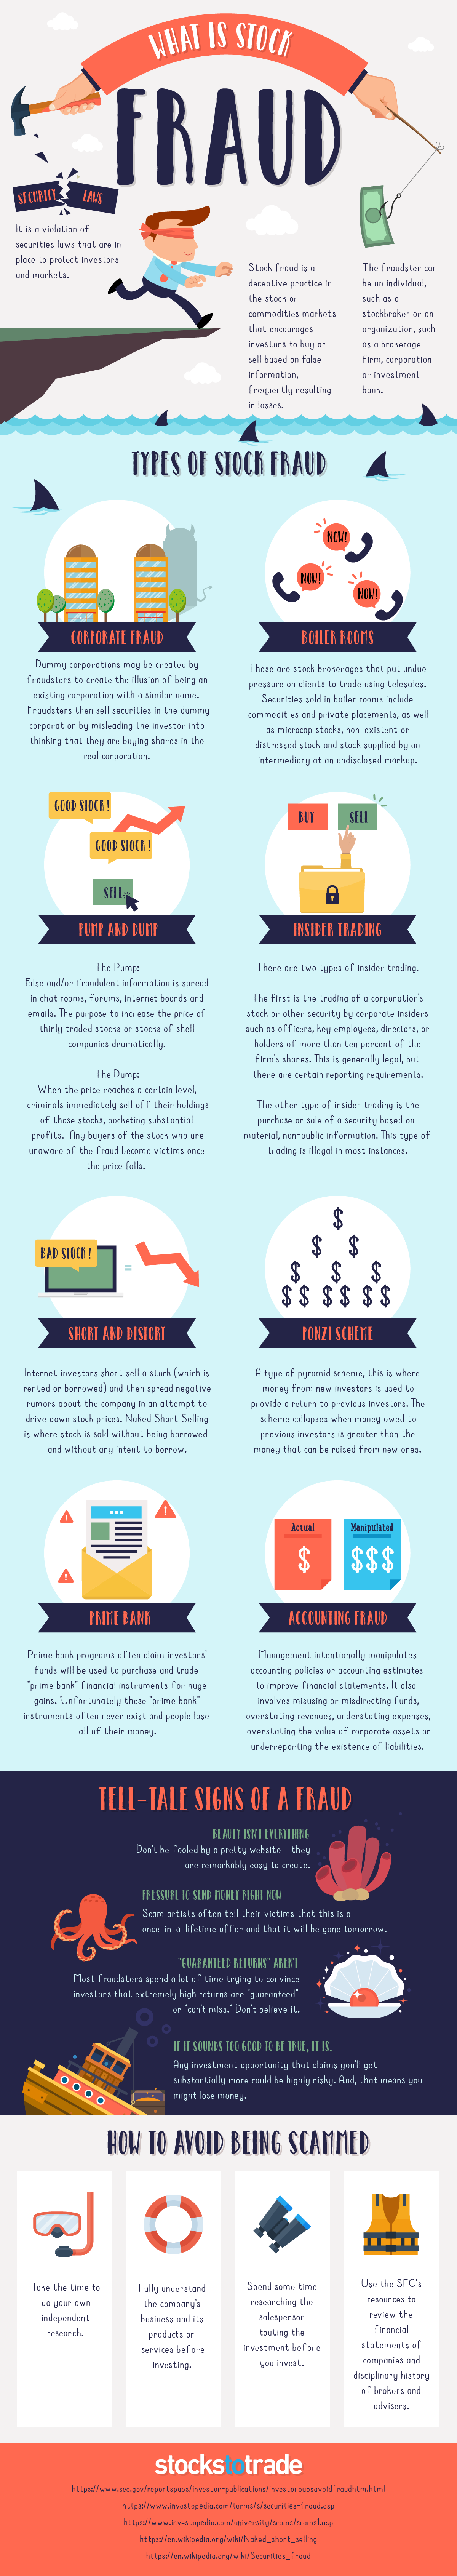 What is Stock Fraud ? {Infographic}